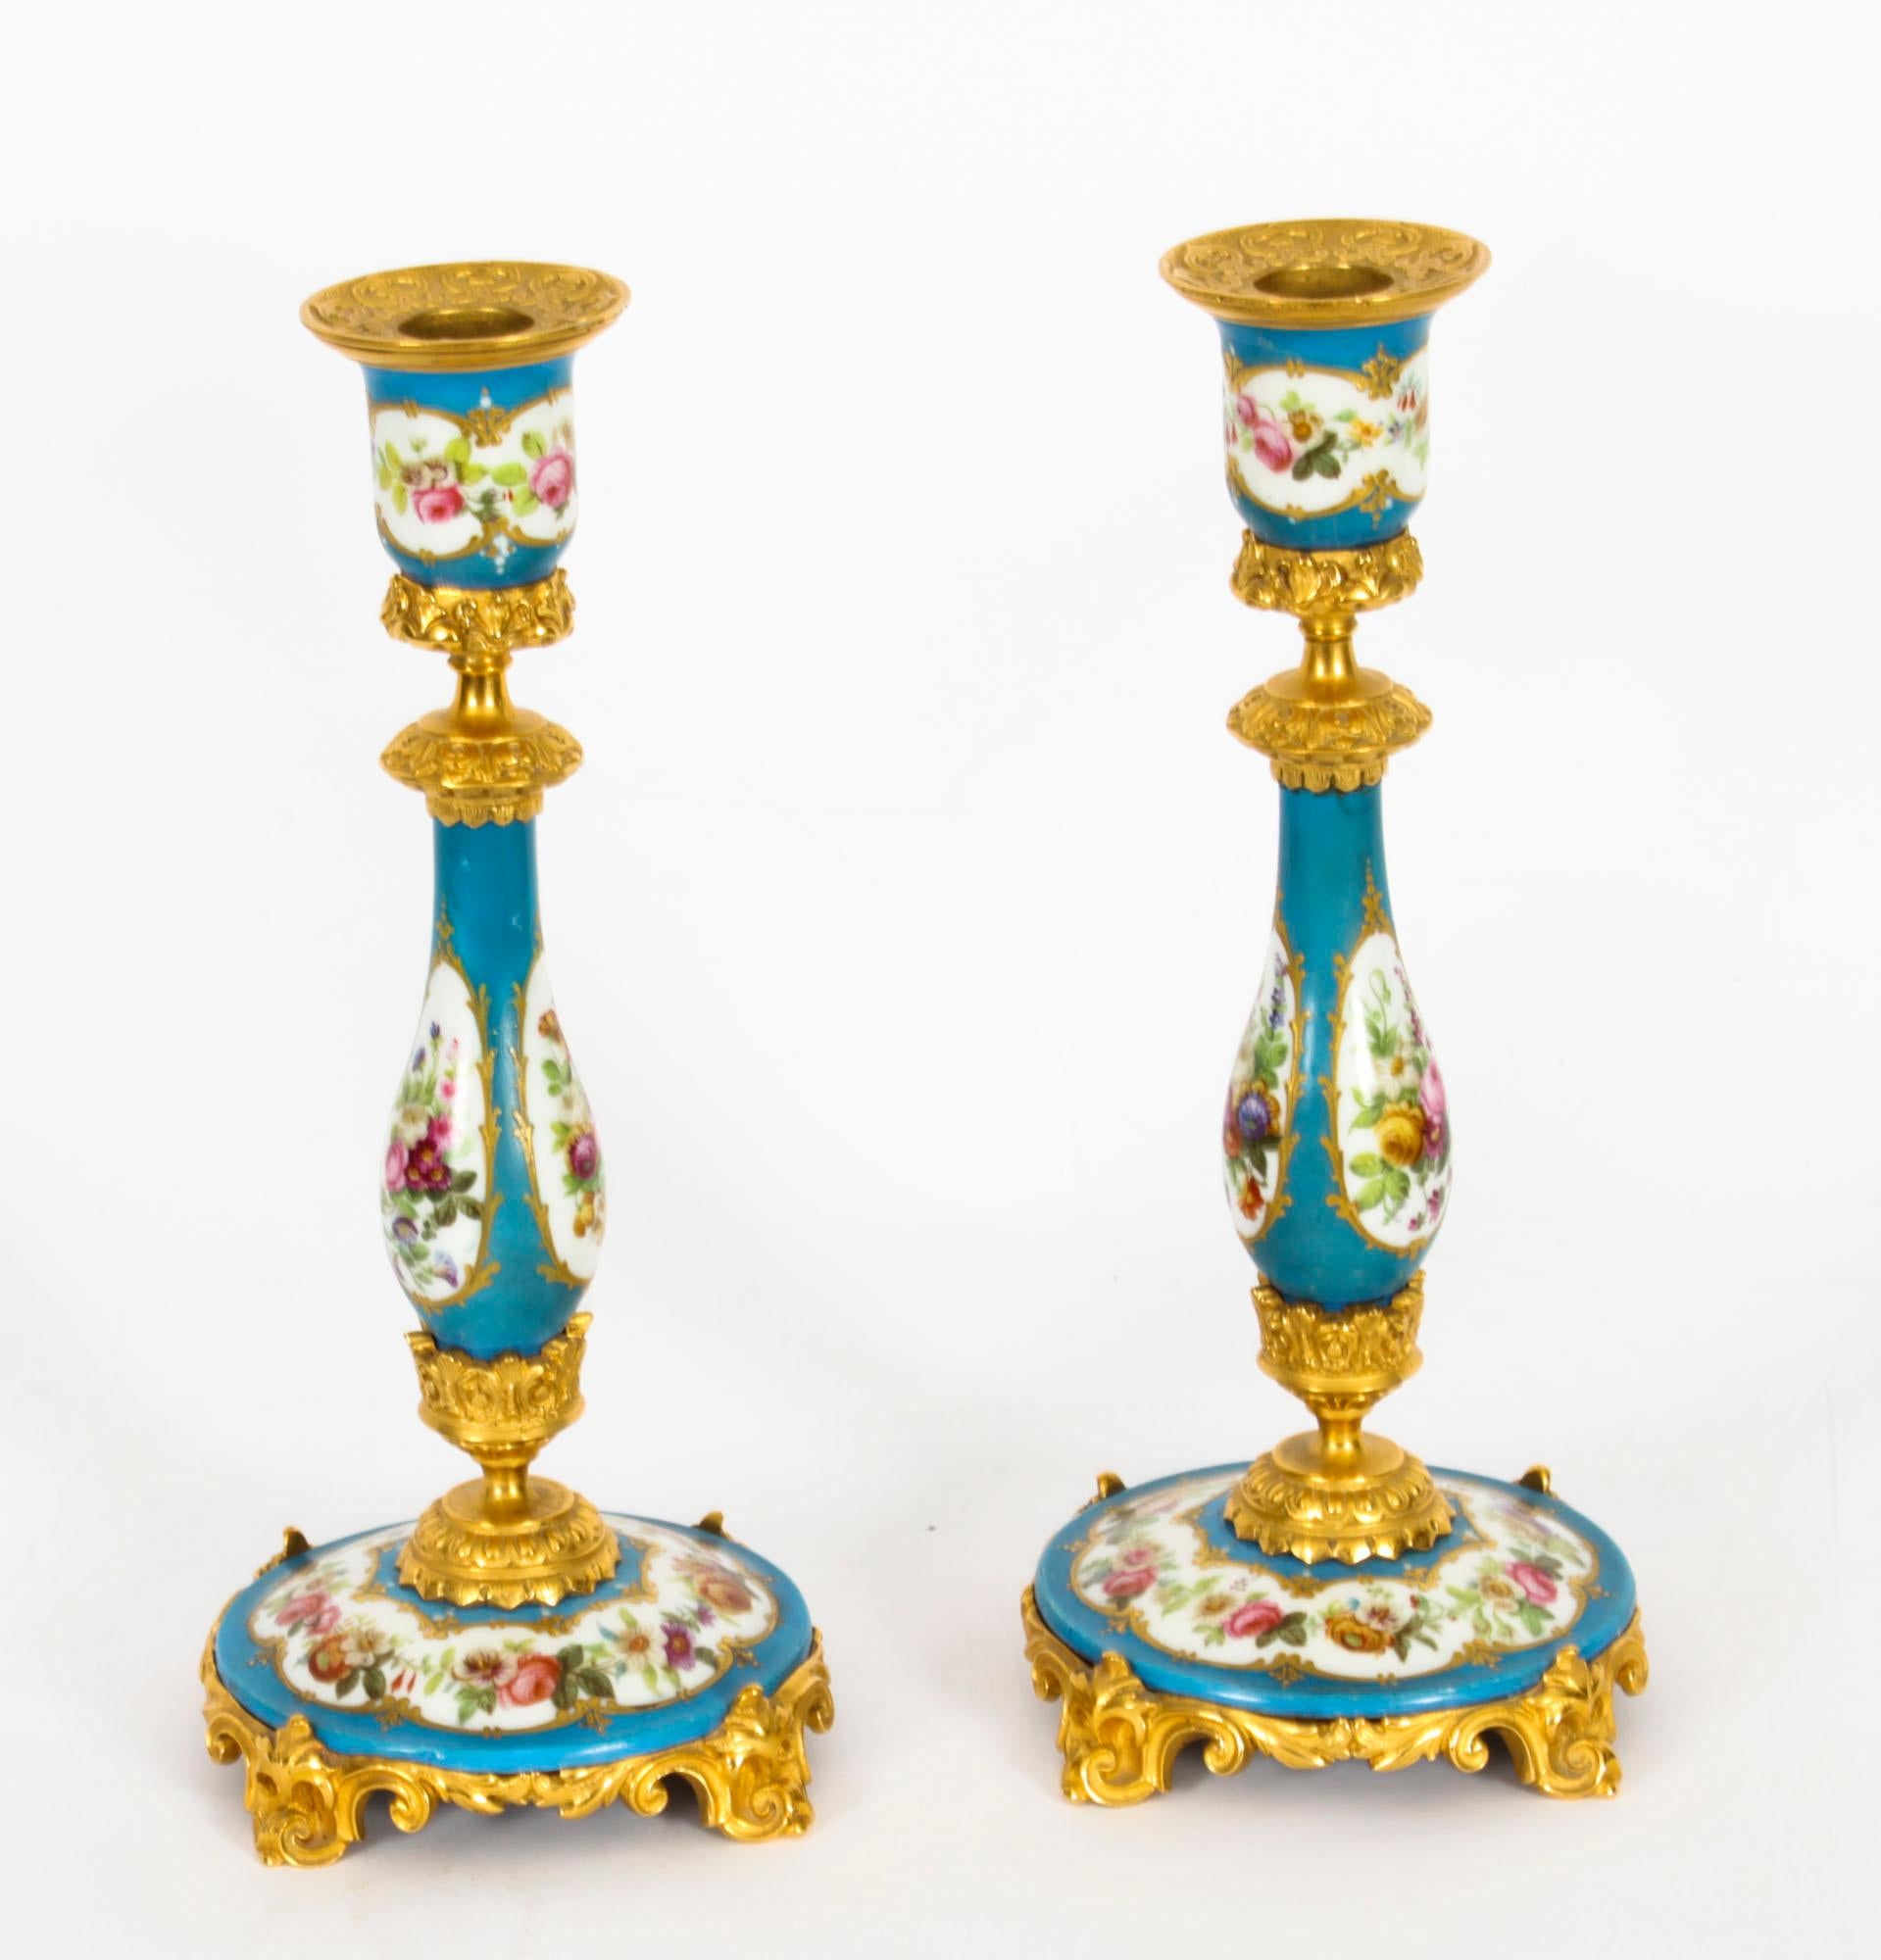 This is a delightful antique pair of French Sevres porcelain mounted ormolu candlesticks, circa 1880 in date.
 
The baluster shaped Sevres porcelain columns feature hand painted panels of summer flowers on a bleu celeste ground with gilt